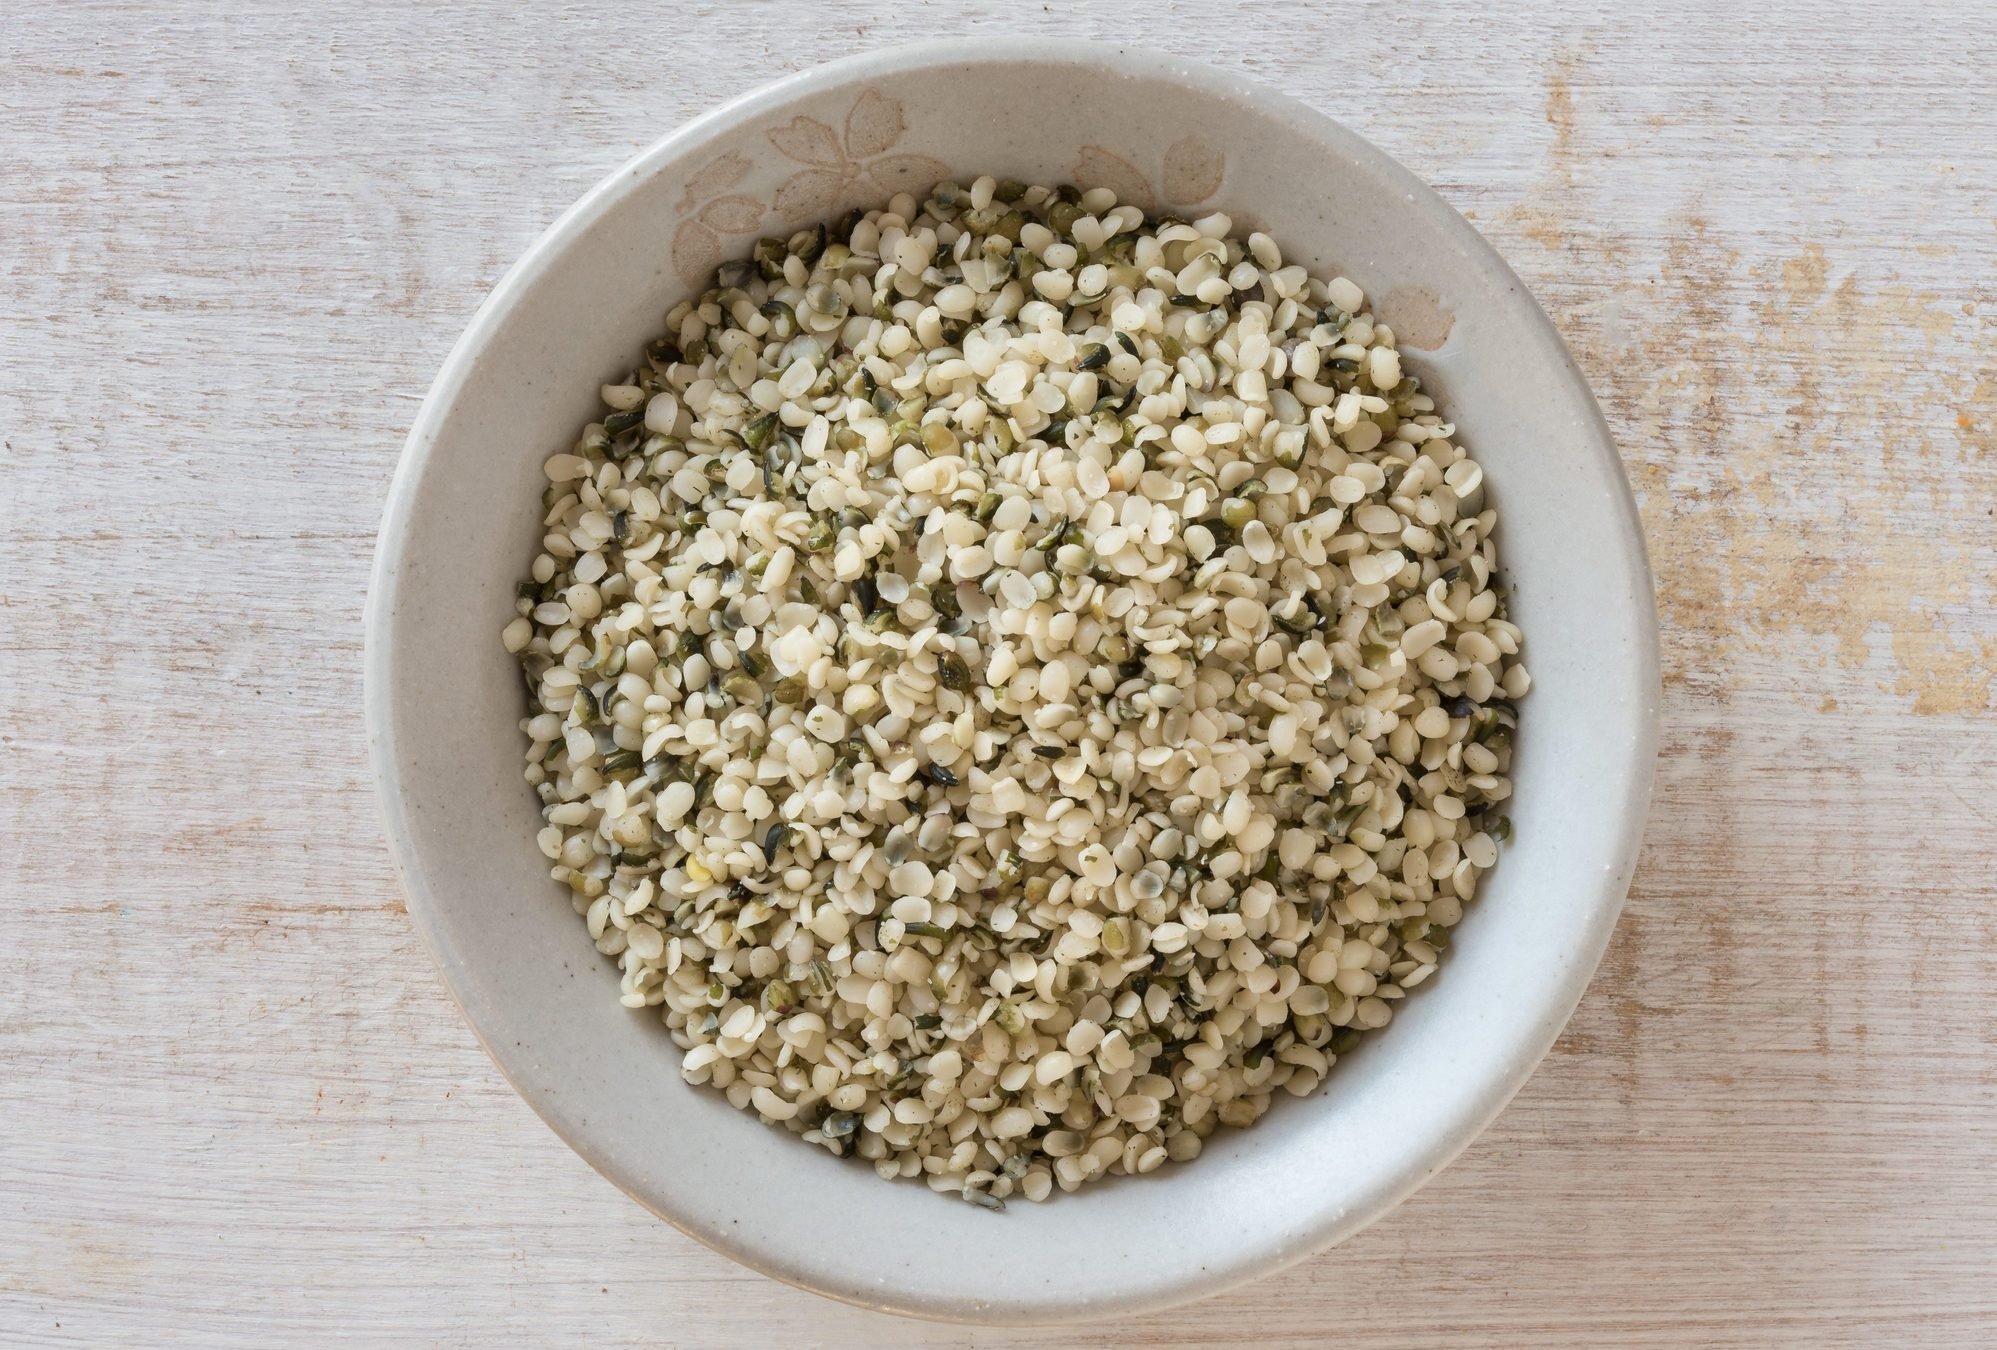 Want to Add Hemp Seeds to Your Diet? Here's What You Need to Know